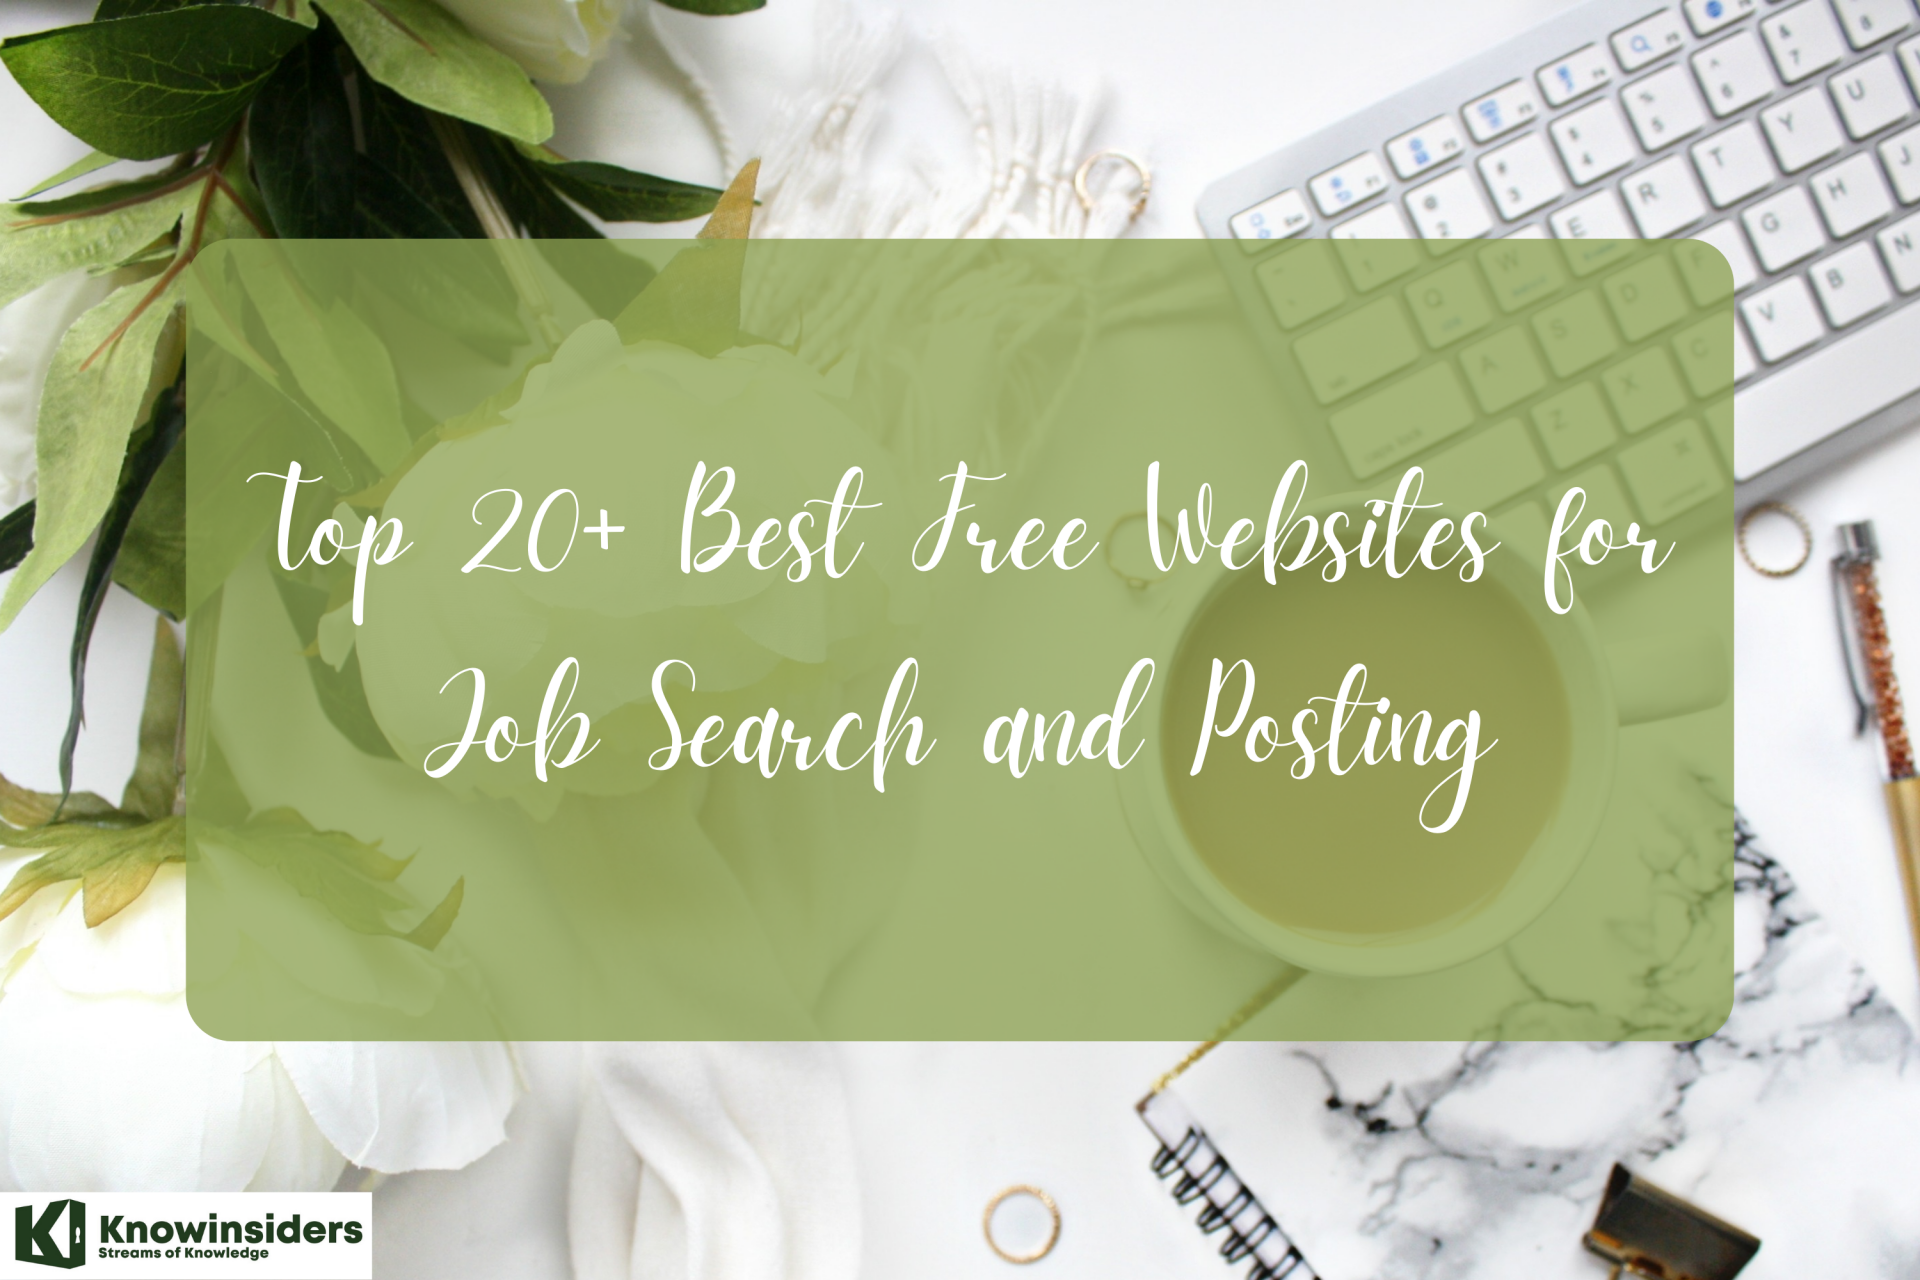 Top 20+ Best Free Websites for Job Search and Posting